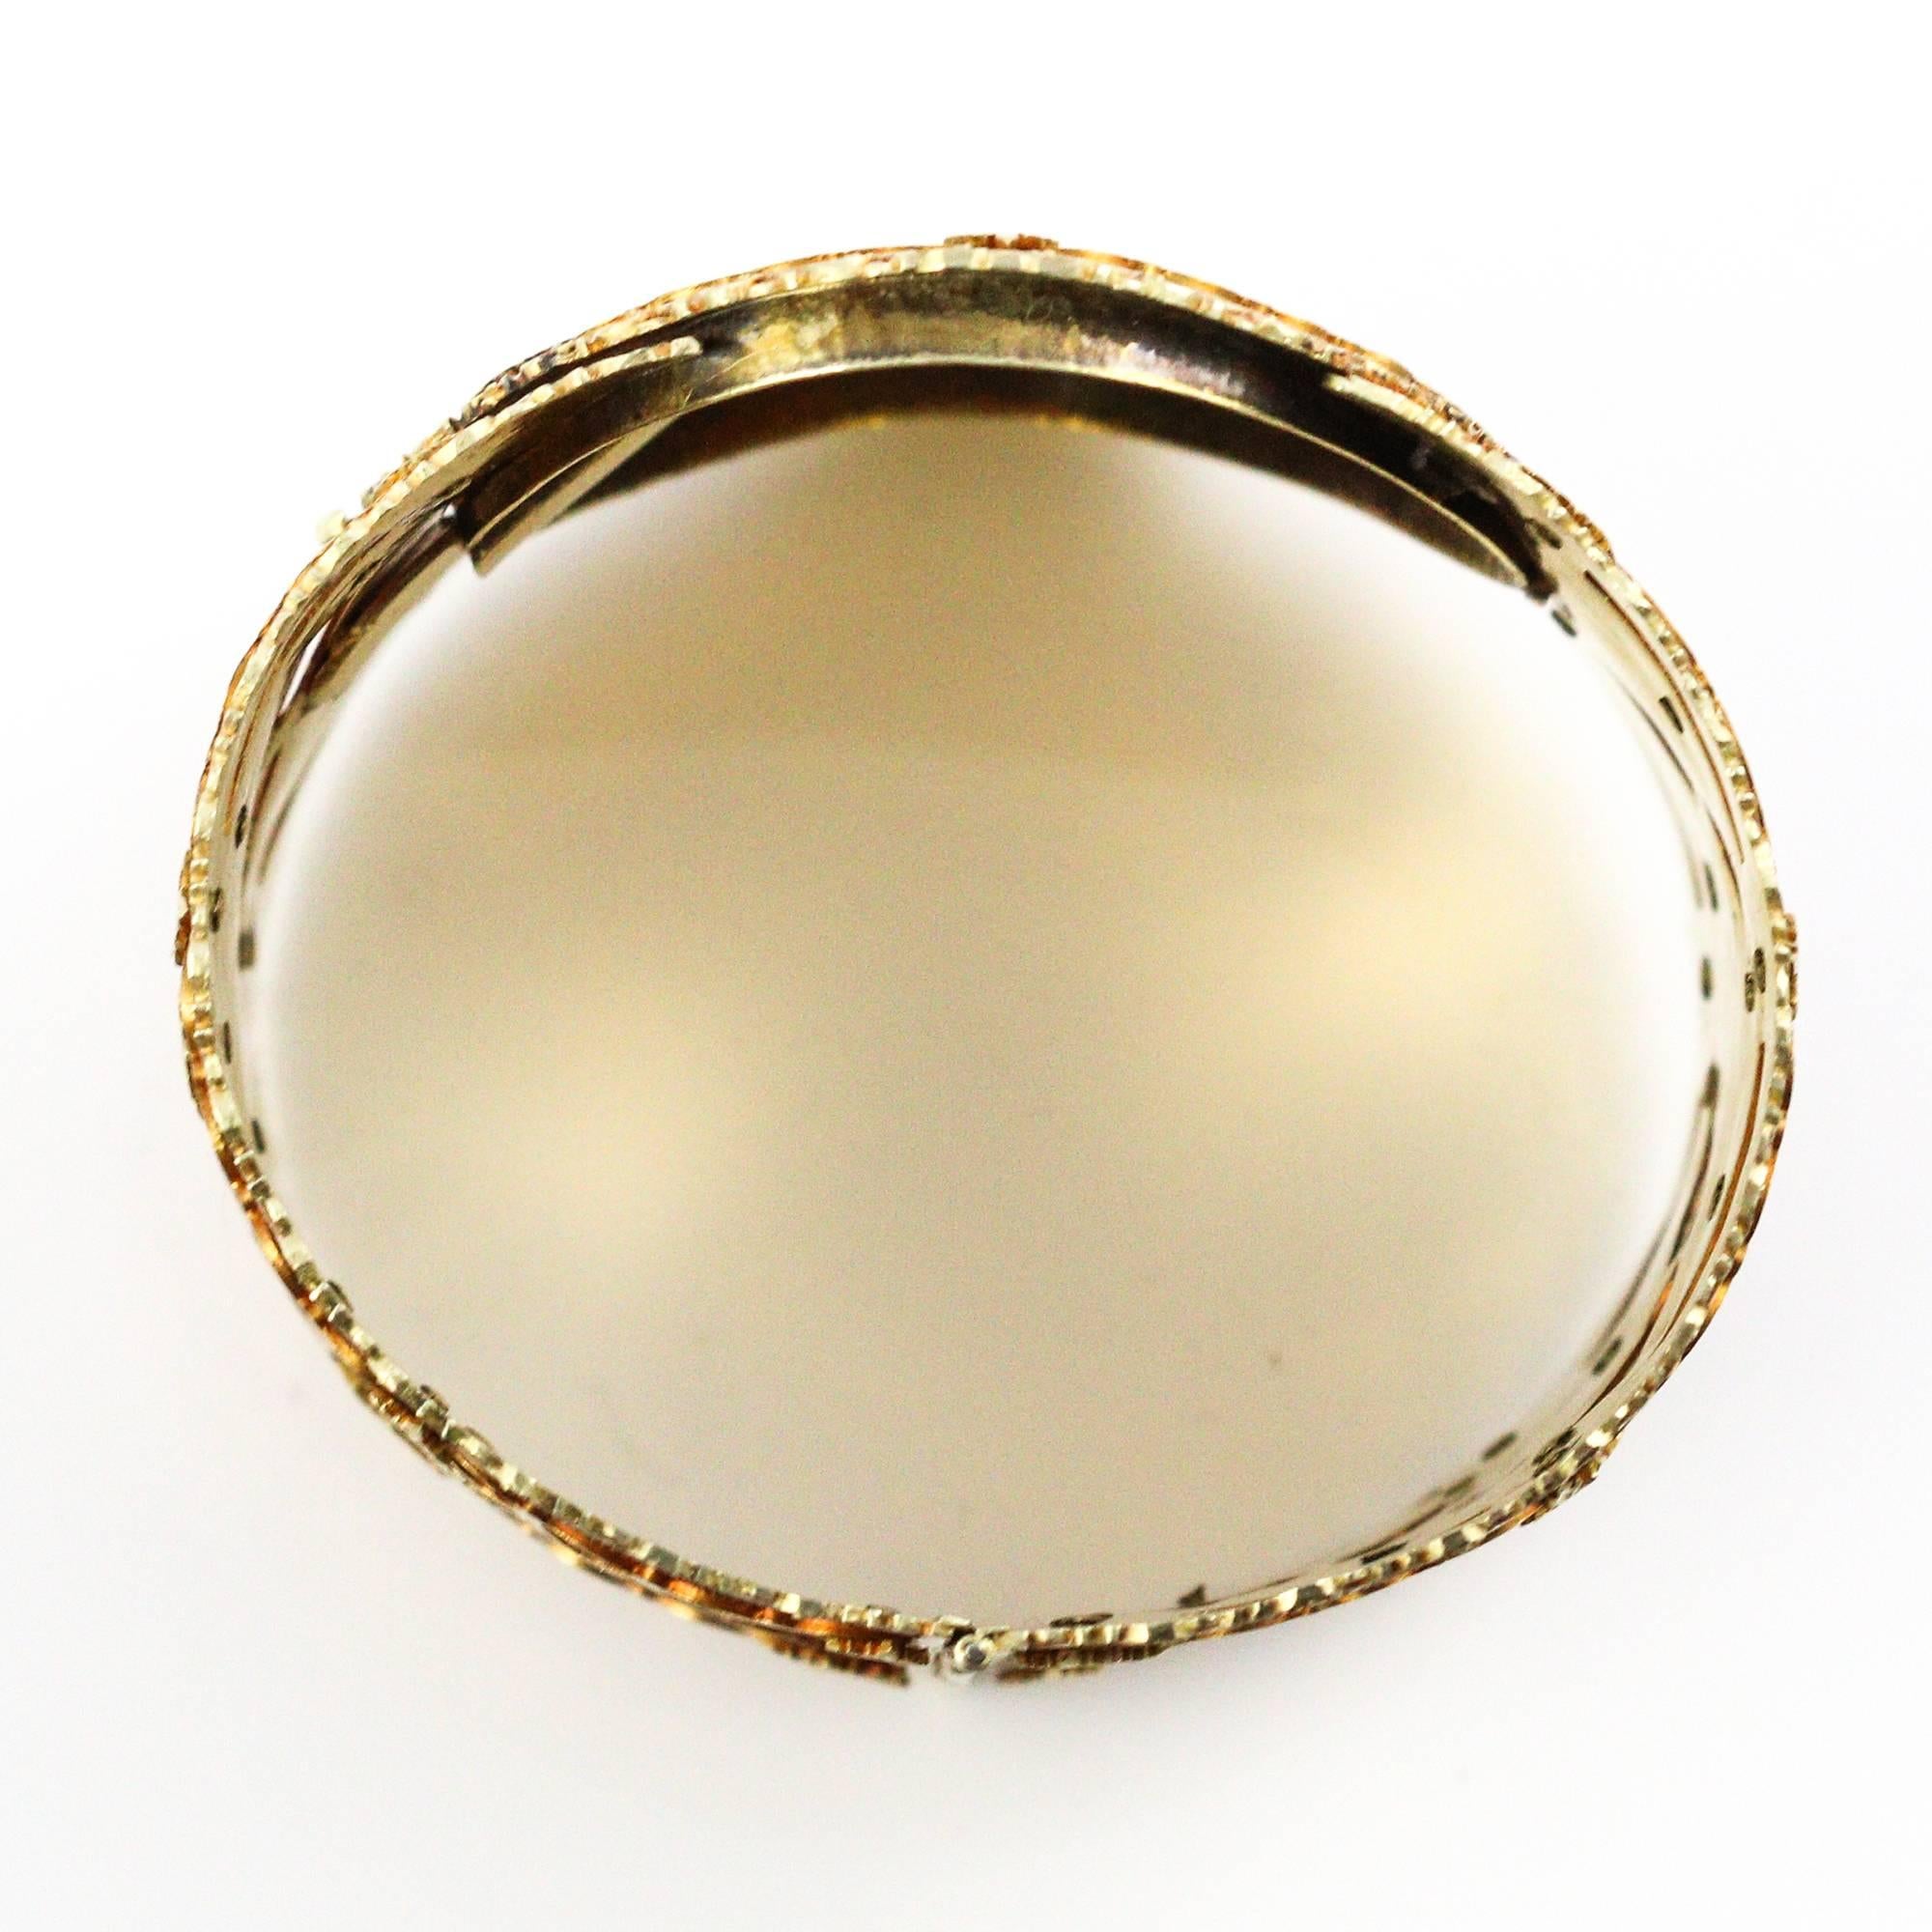 This 14k yellow gold Etruscan style wide bangle bracelet best dates back to 1890-1910. The bracelet is 52mm wide around the outside and 62mm wide at the oval portion in the very center. The craftsmanship and detail work on the bracelet is truly